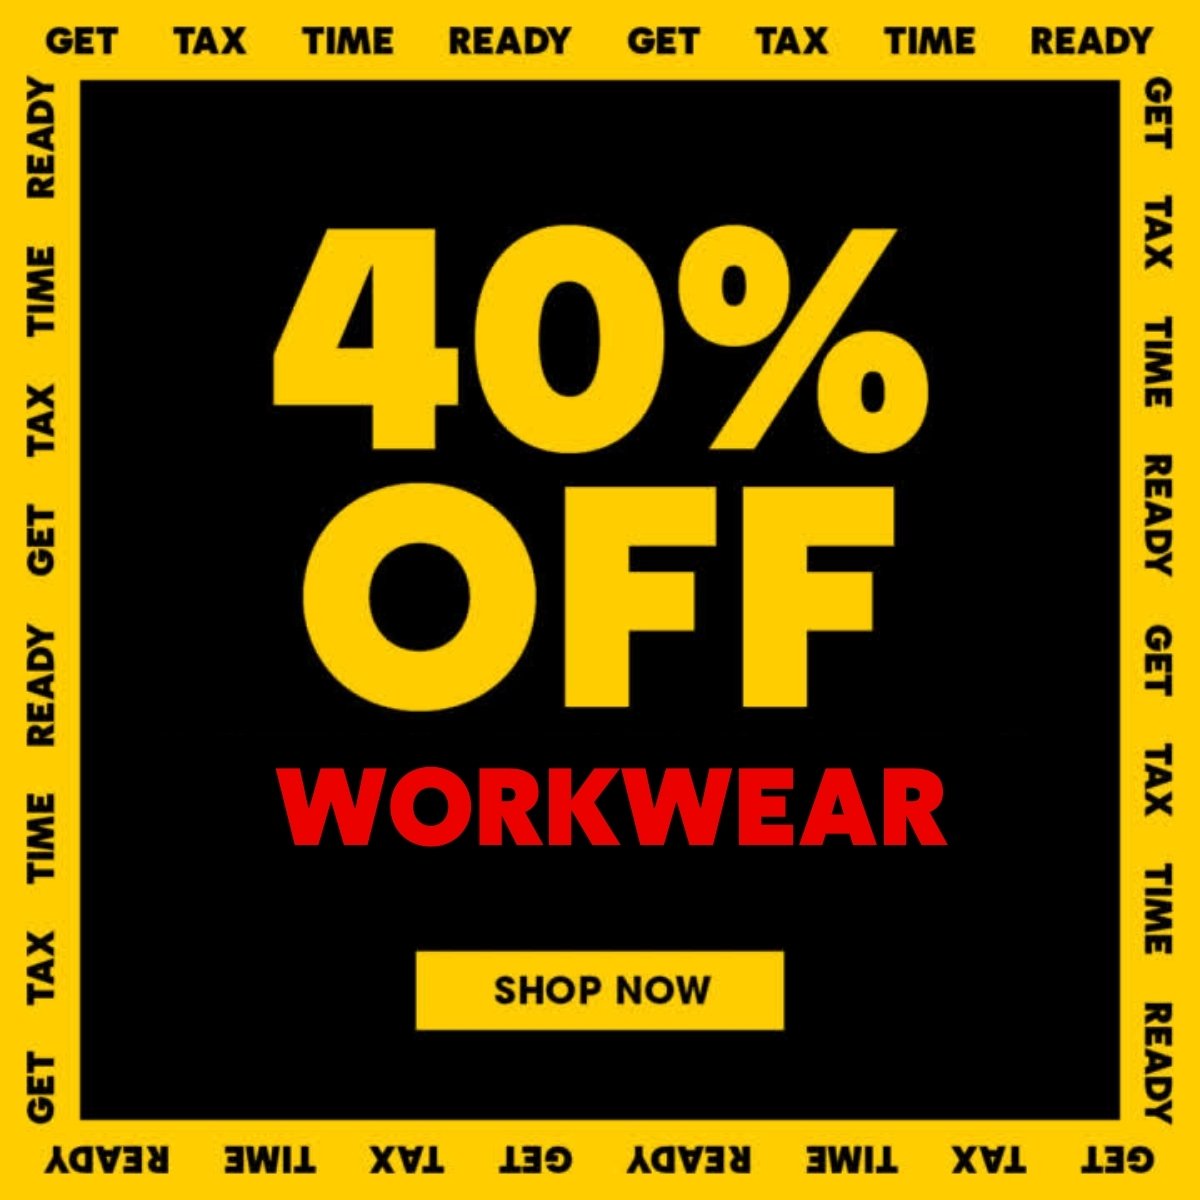 MID SEASON SALE UP TO 50% OFF STOREWIDE